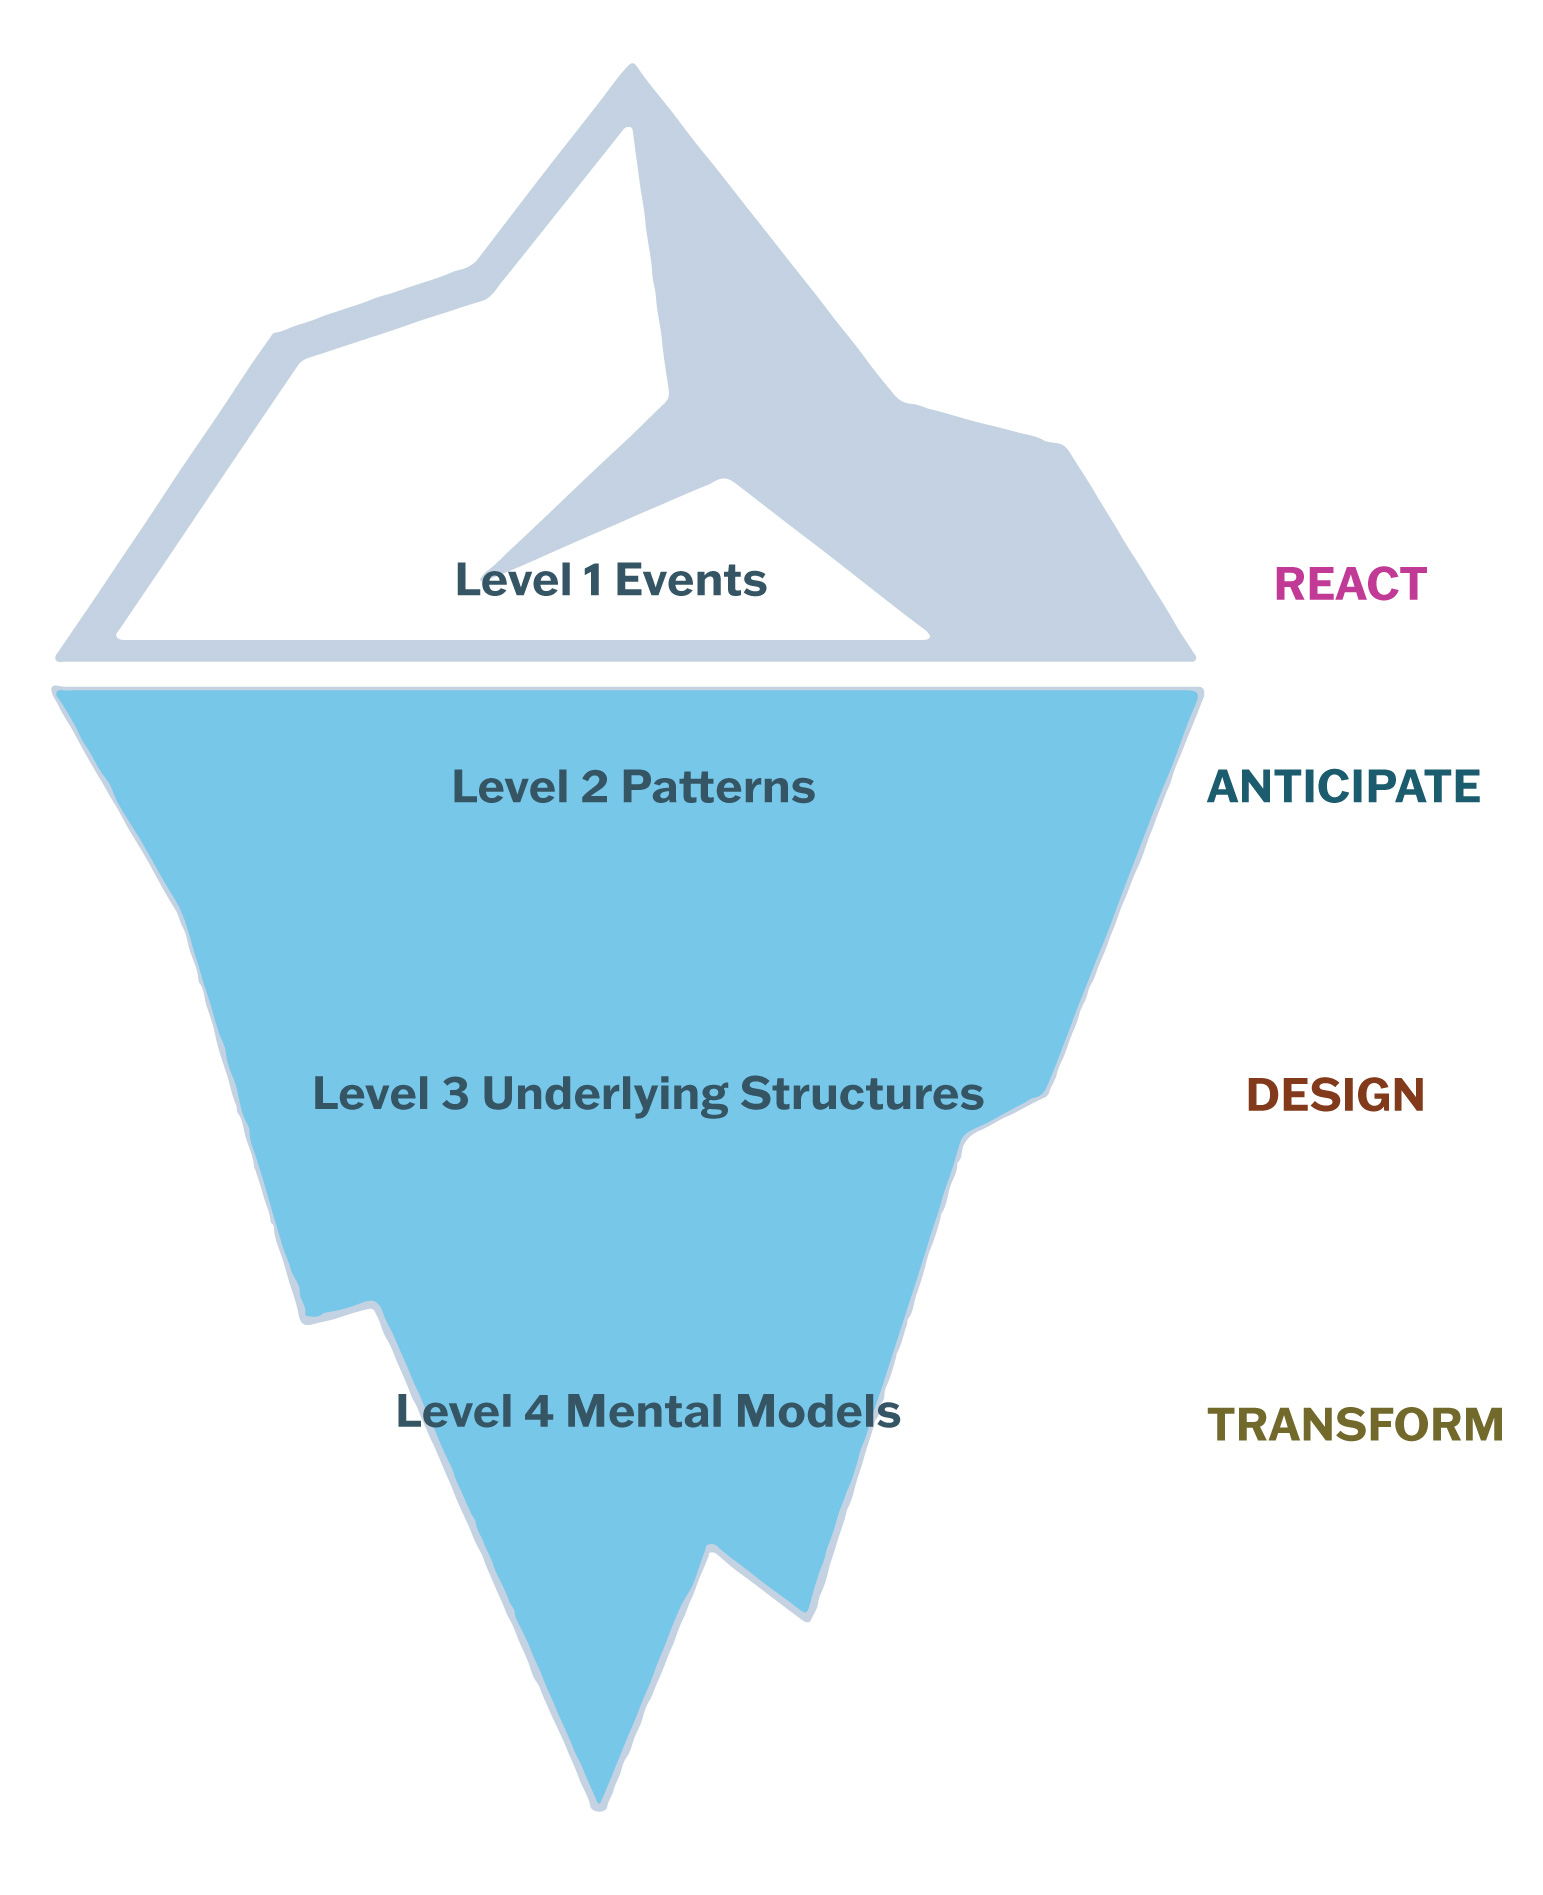 Infographic showing an iceberg with 4 levels of depth, events on top, then patterns, underlyin structures, and mental models at the bottom.